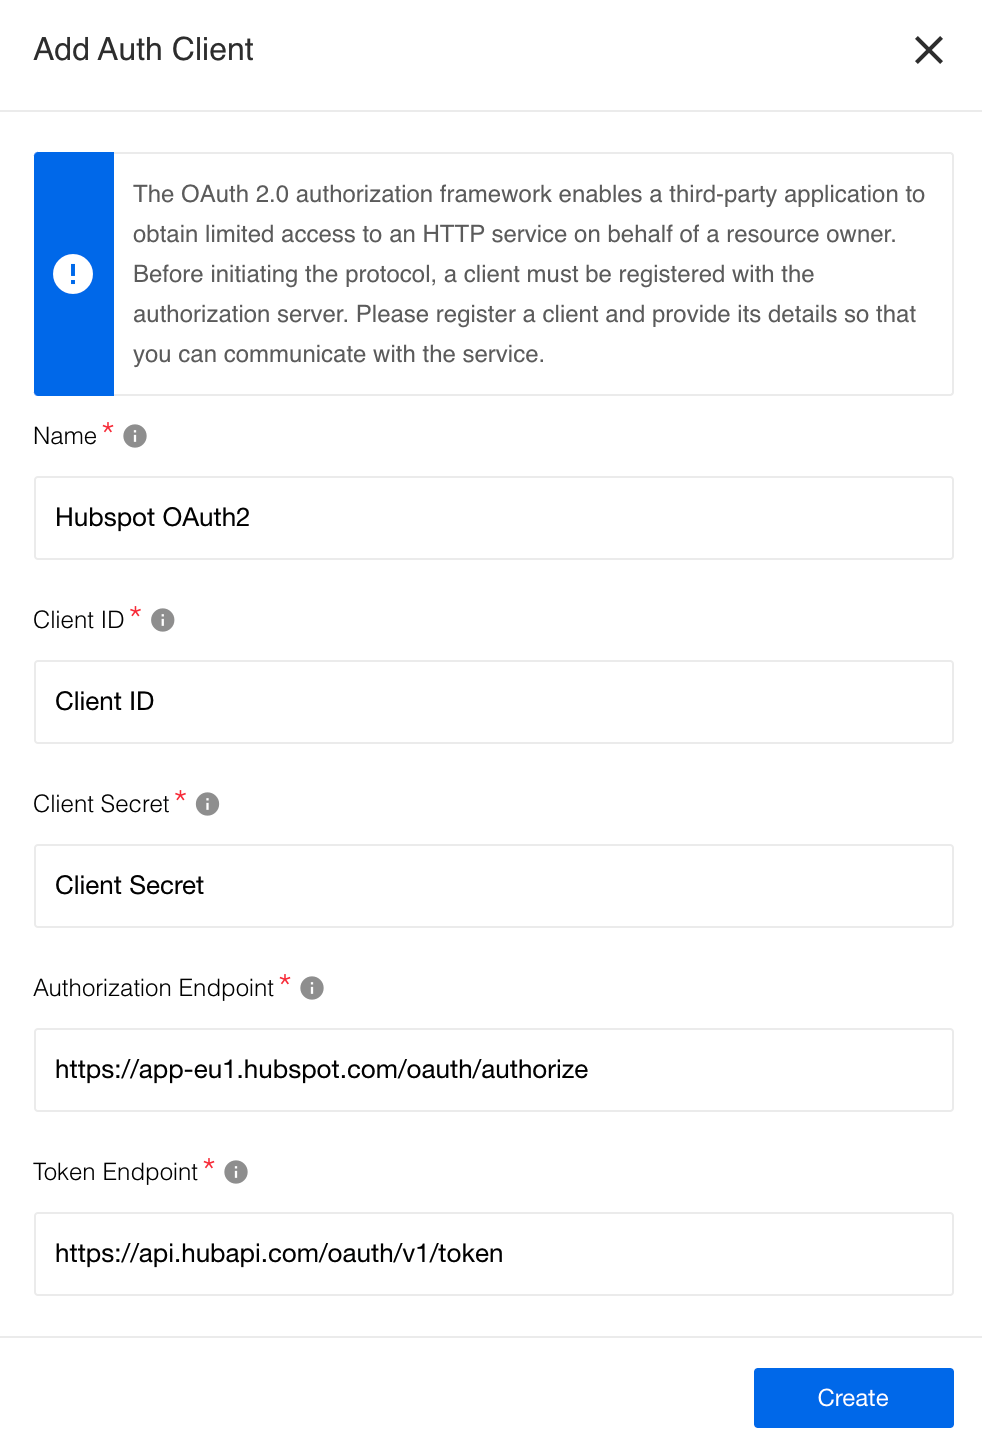 Add OAuth client